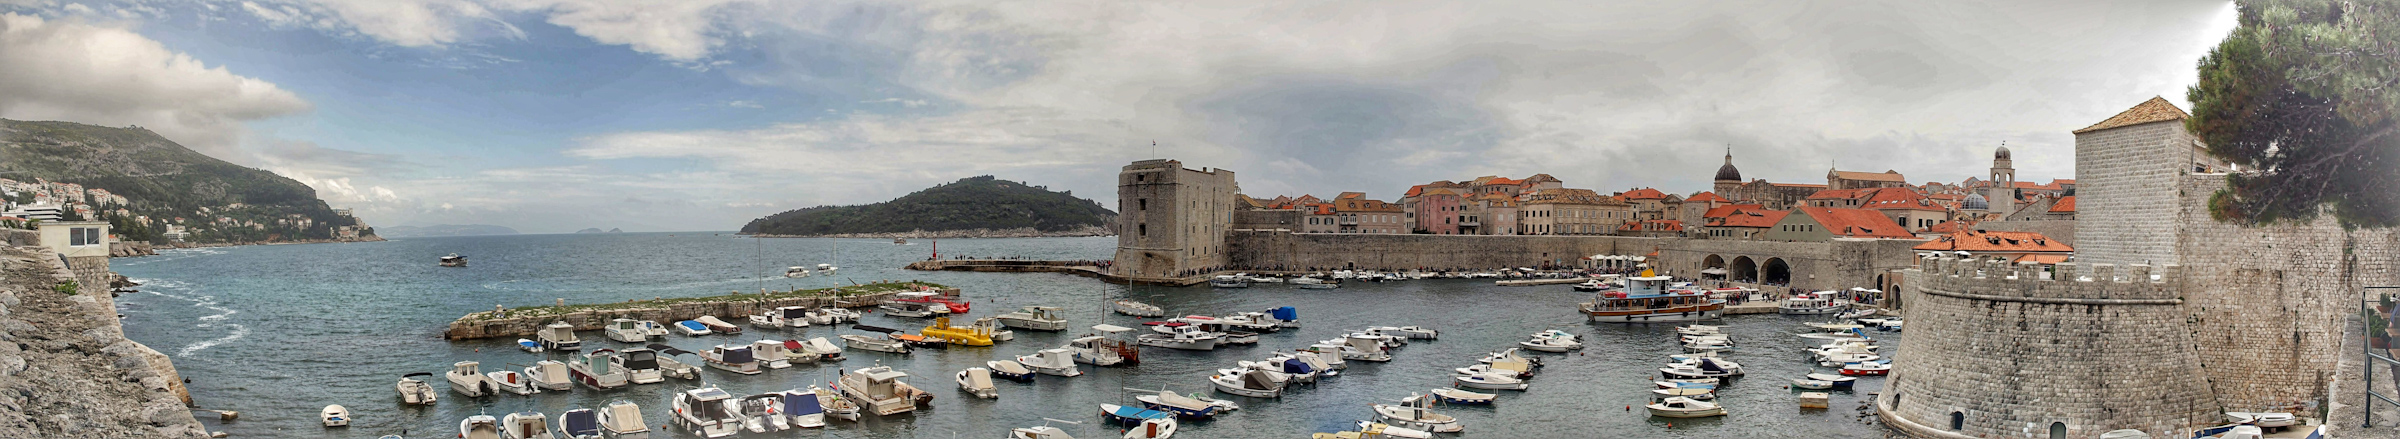 View of the Port of Dubrovnik...